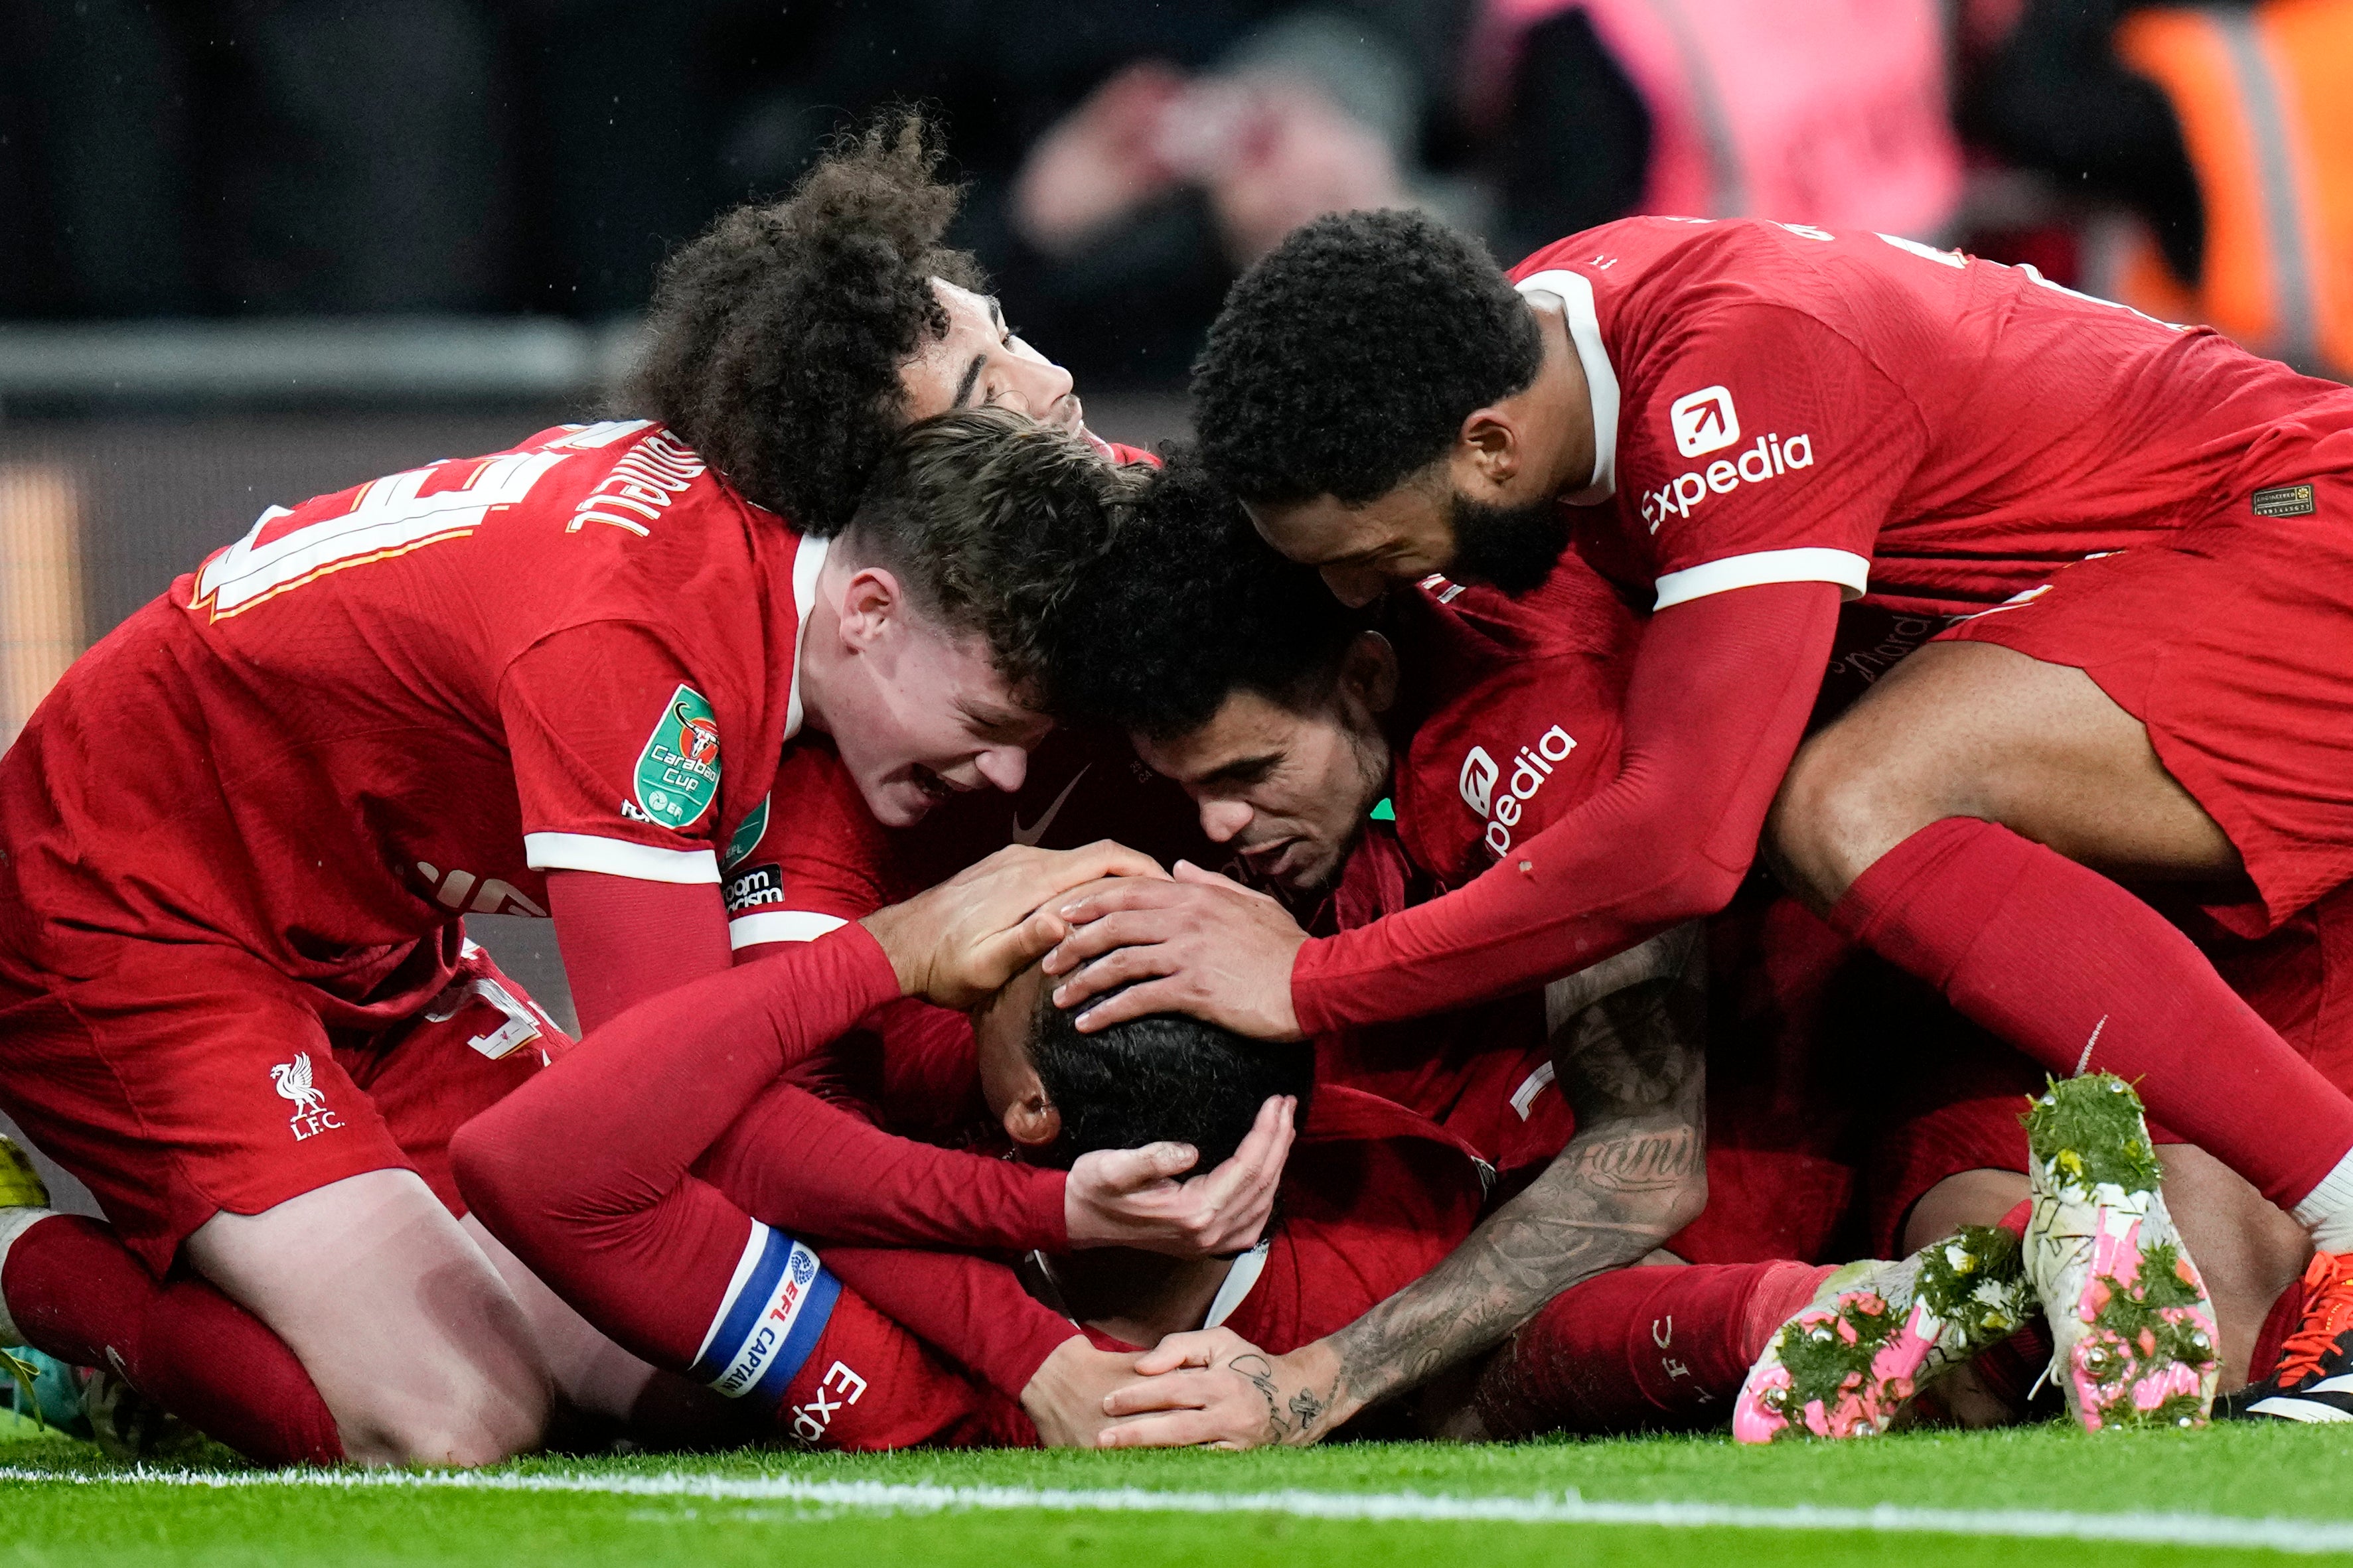 Van Dijk celebrated his goal surrounded by Liverpool’s triumphant youngsters